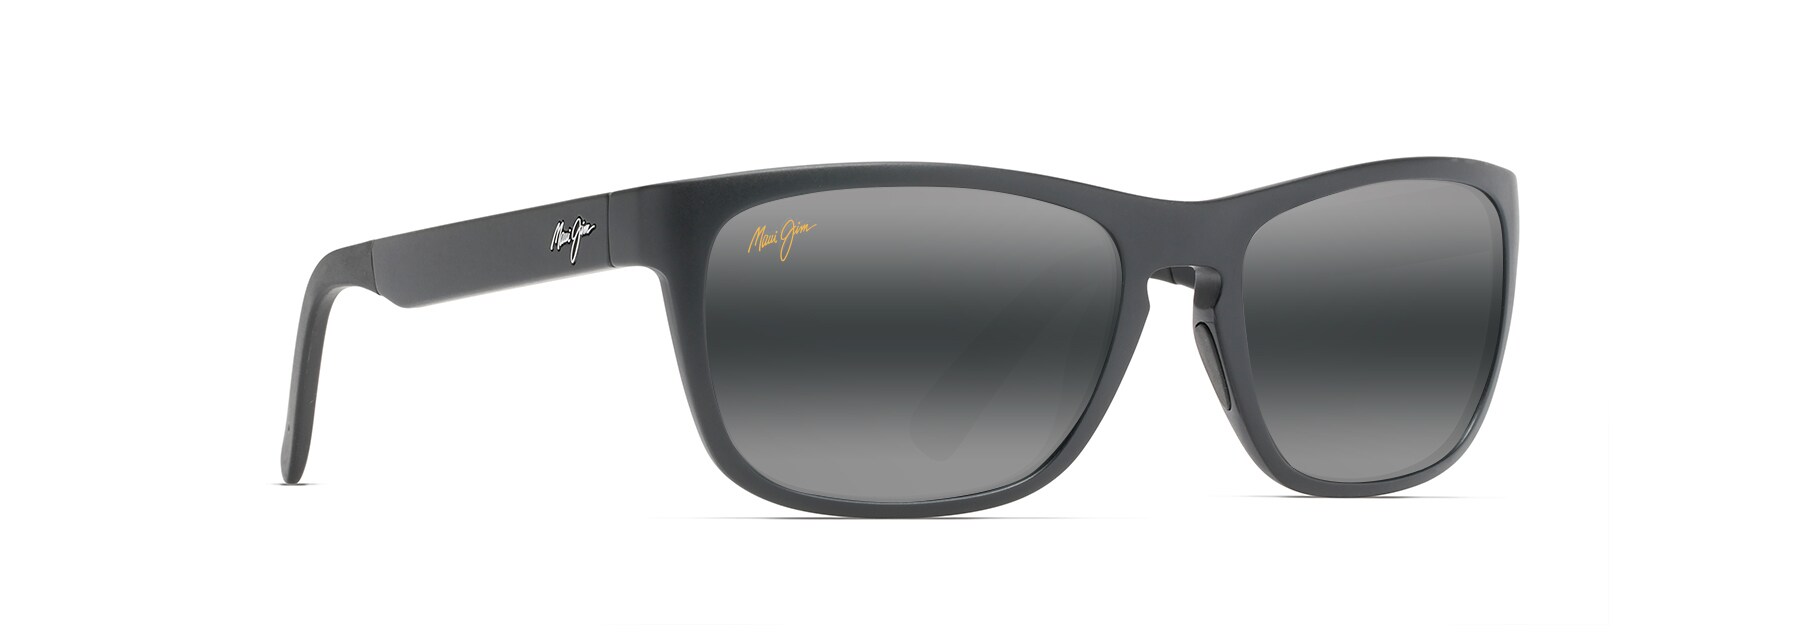 SOUTH SWELL Classic Sunglasses